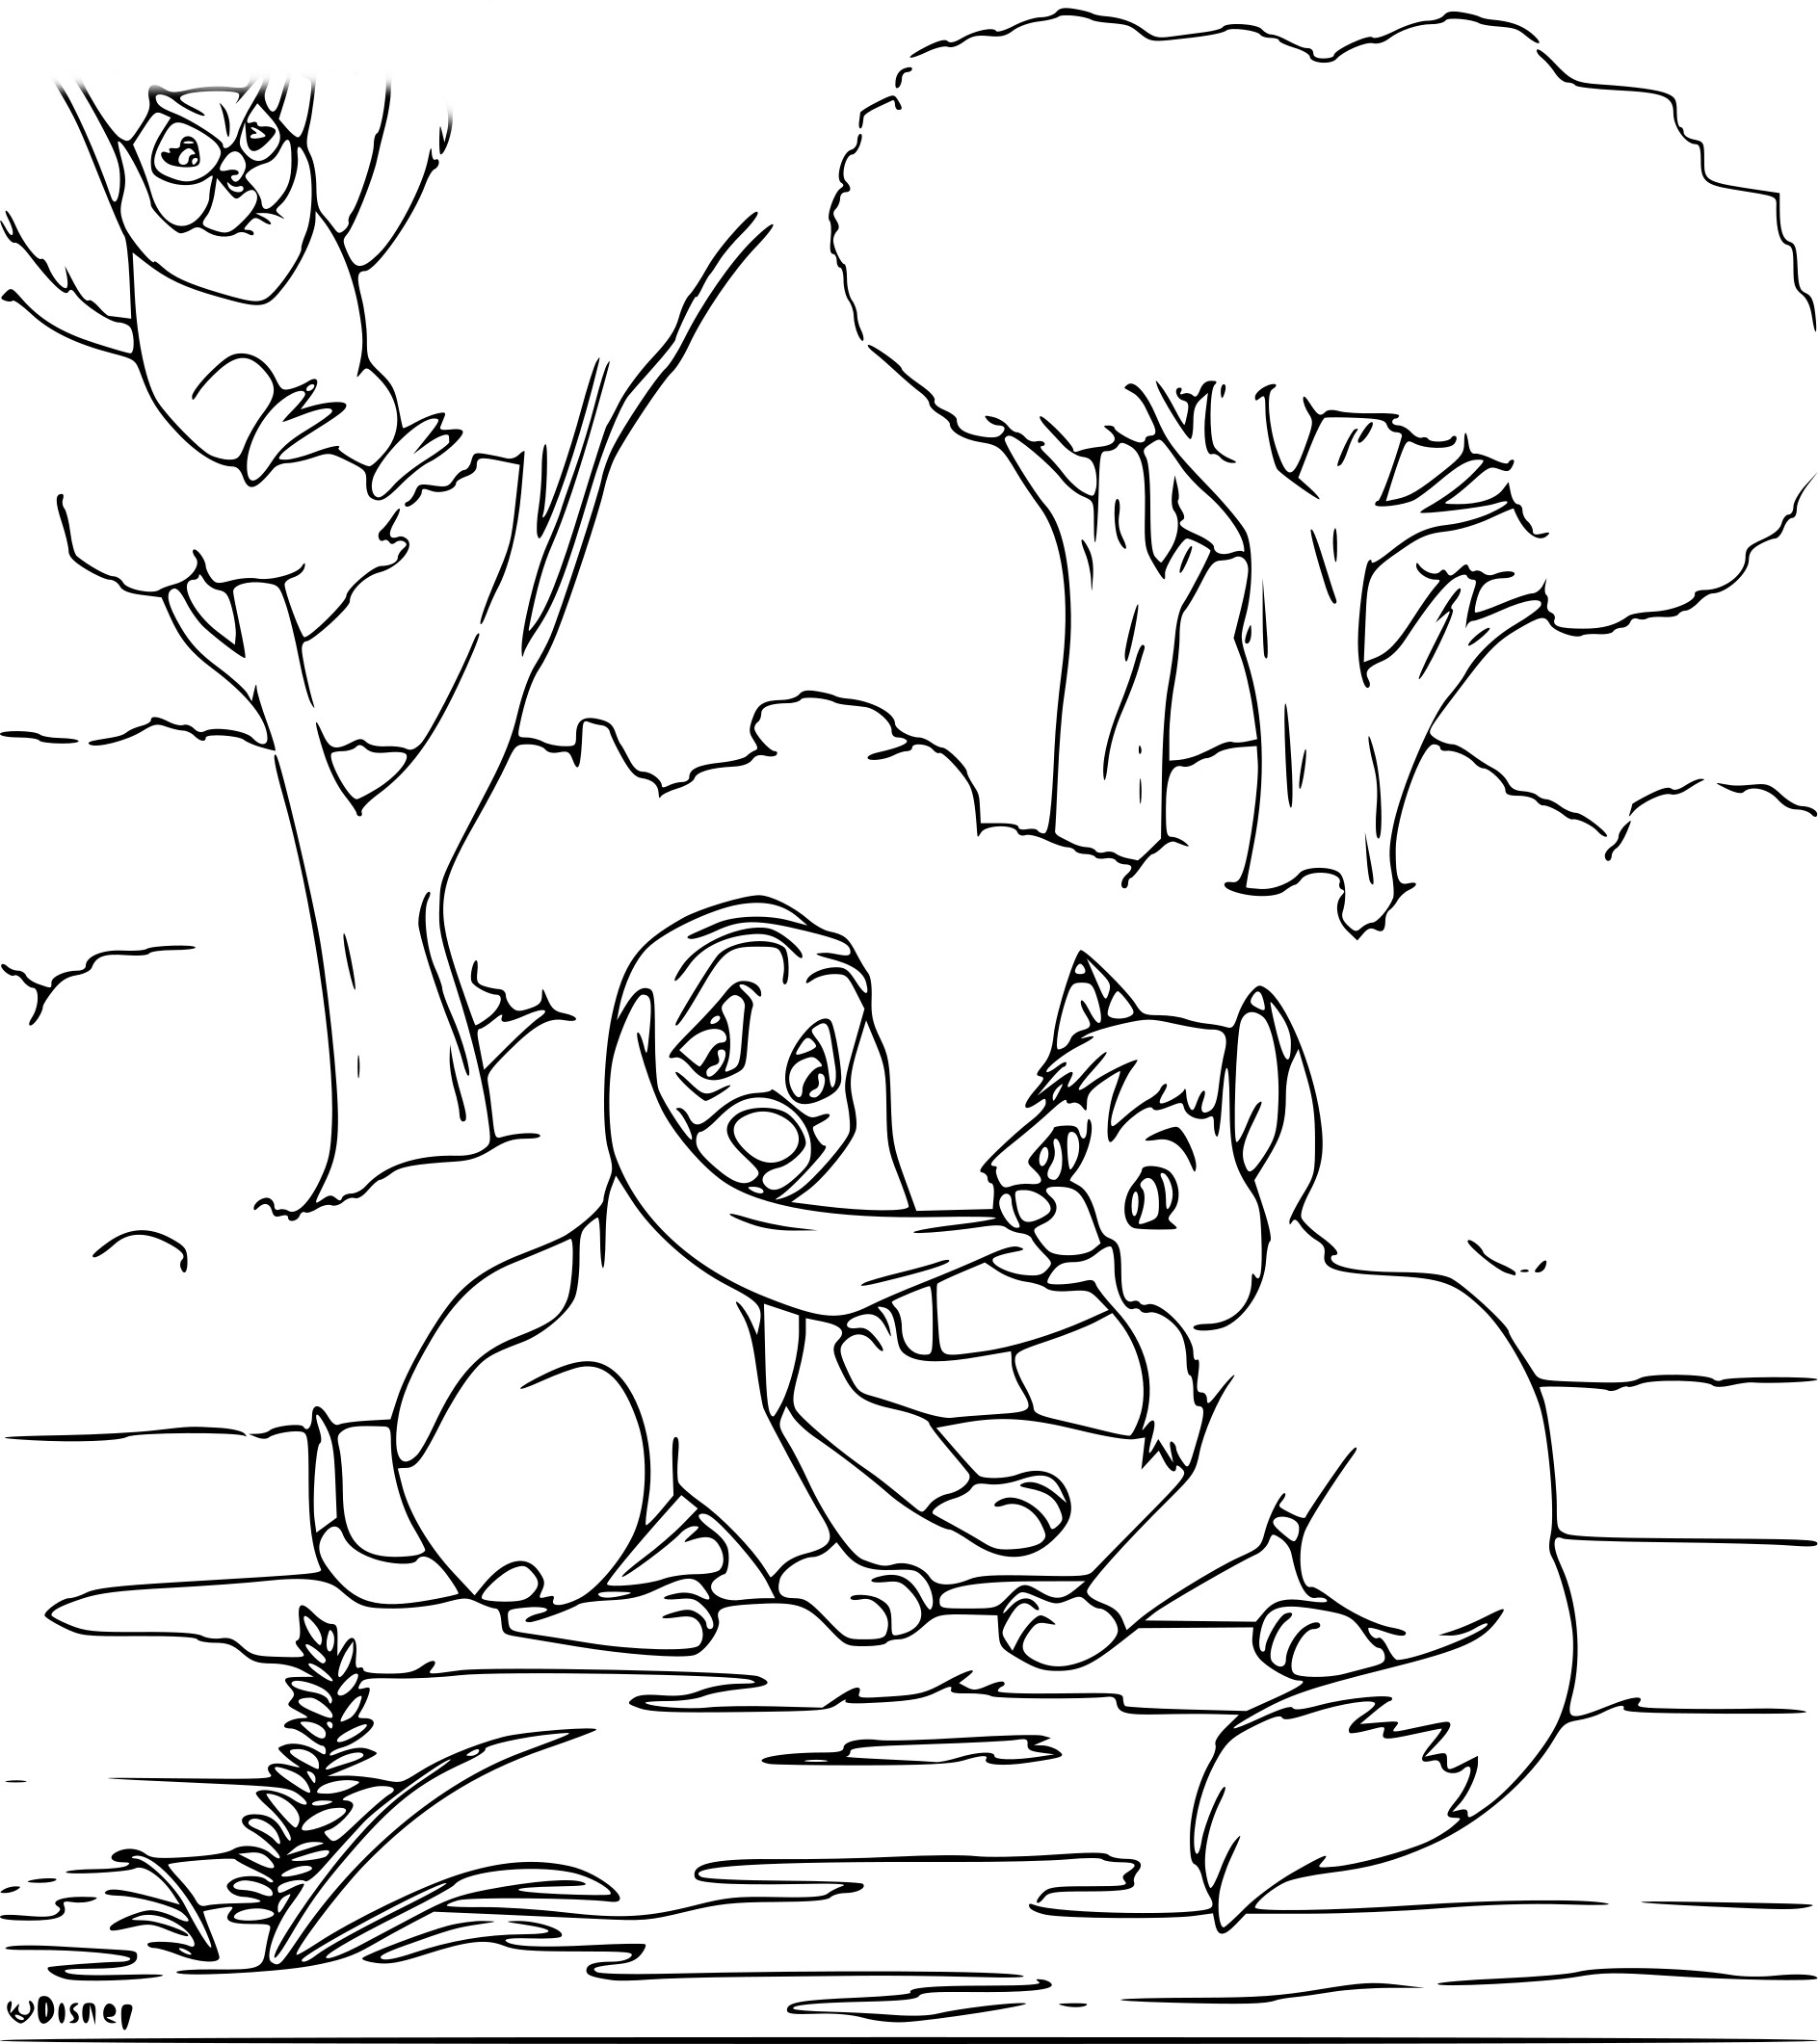 Rox And Rouky drawing and coloring page